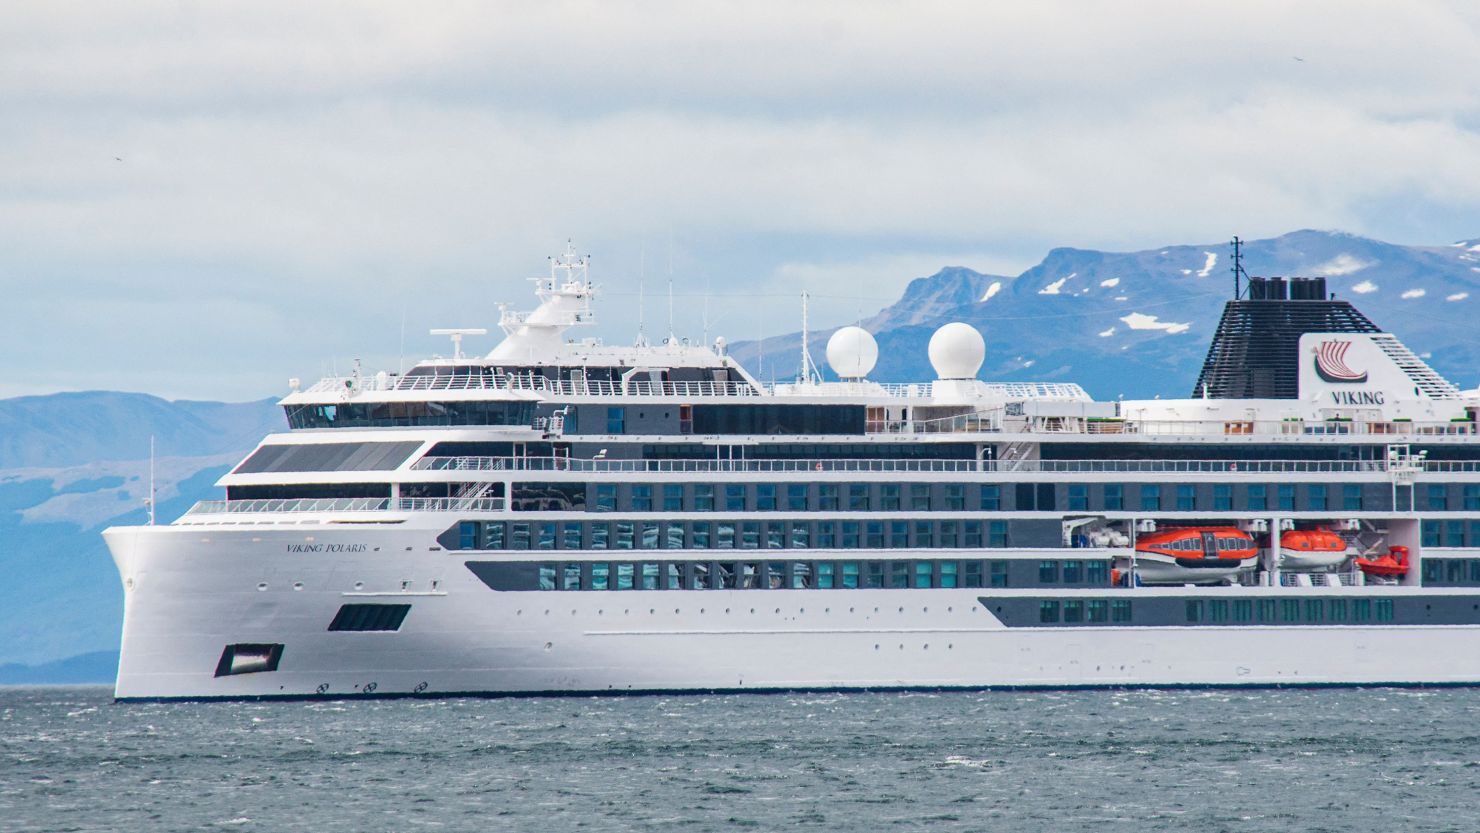 The Norwegian-flagged cruise ship Viking Polaris in Ushuaia, southern Argentina, on Dec. 1, after the death of a passenger on board.